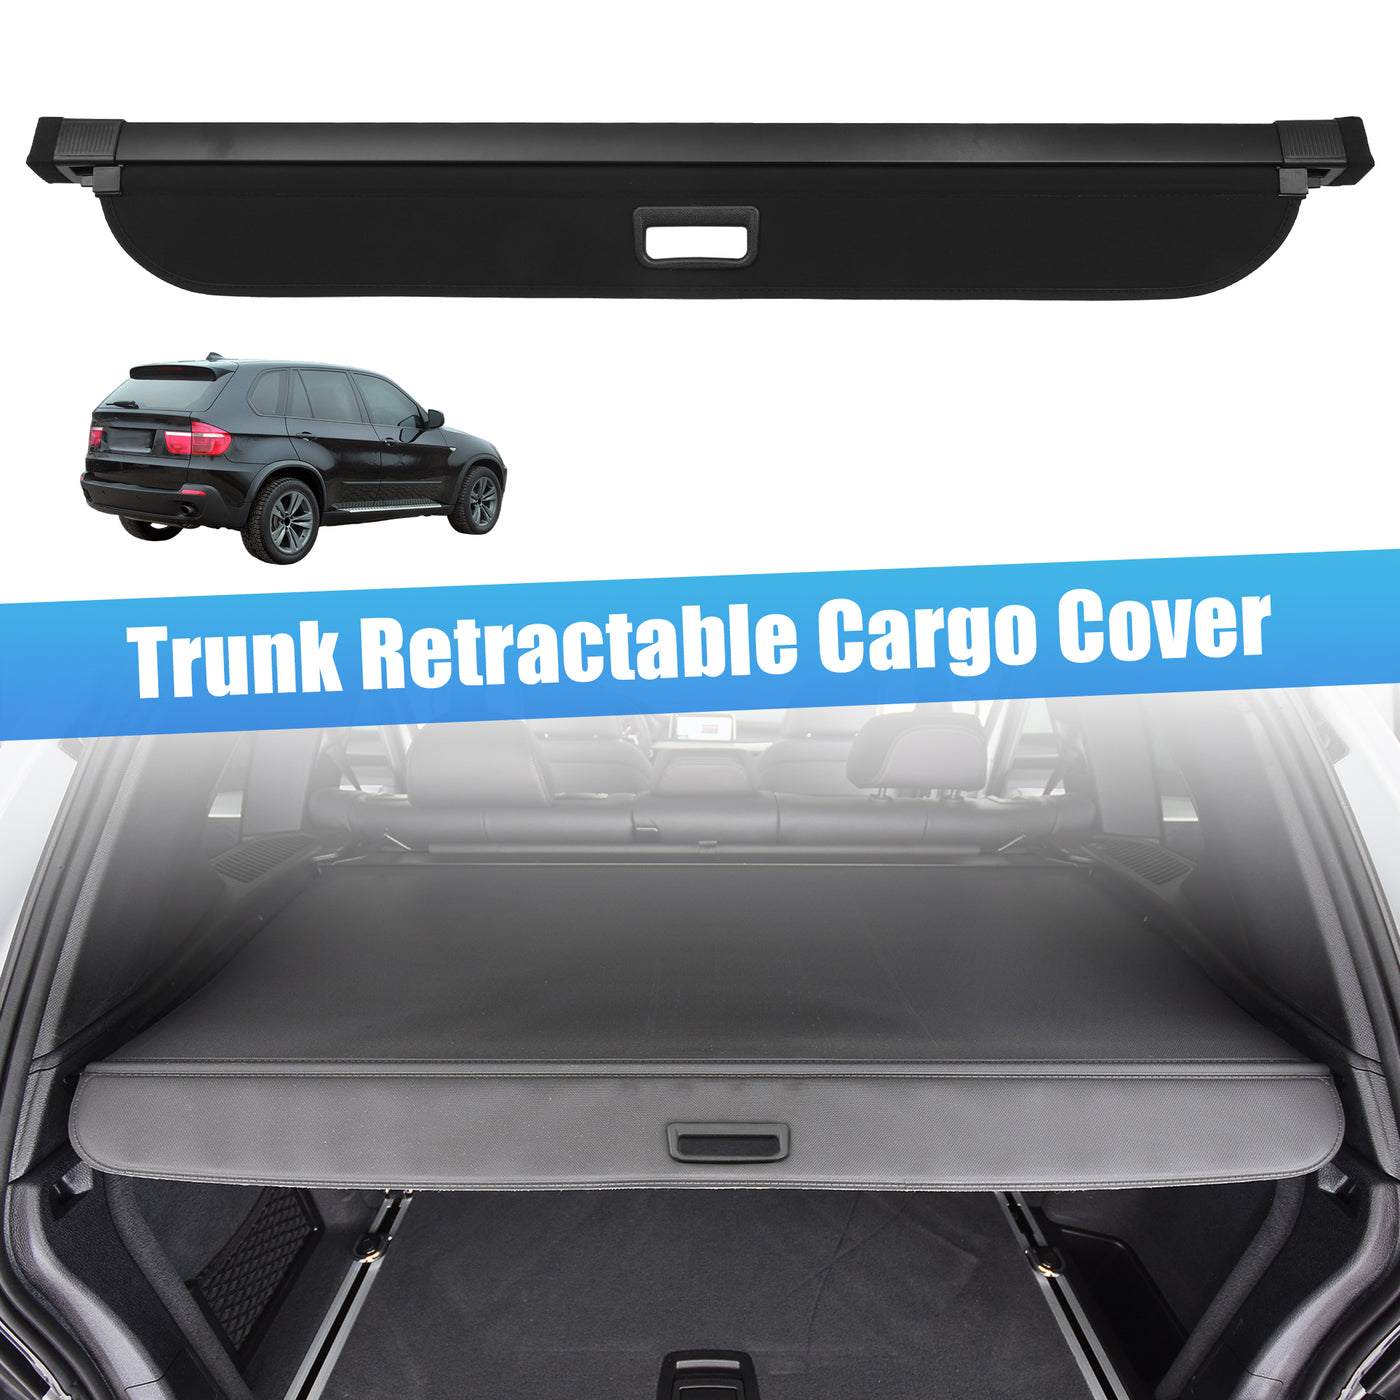 ACROPIX Retractable Cargo Cover Rear Trunk Cover Shield Shade Adjustable Fit for BMW X5 2008-2018 Retractable Privacy Cover - Pack of 1